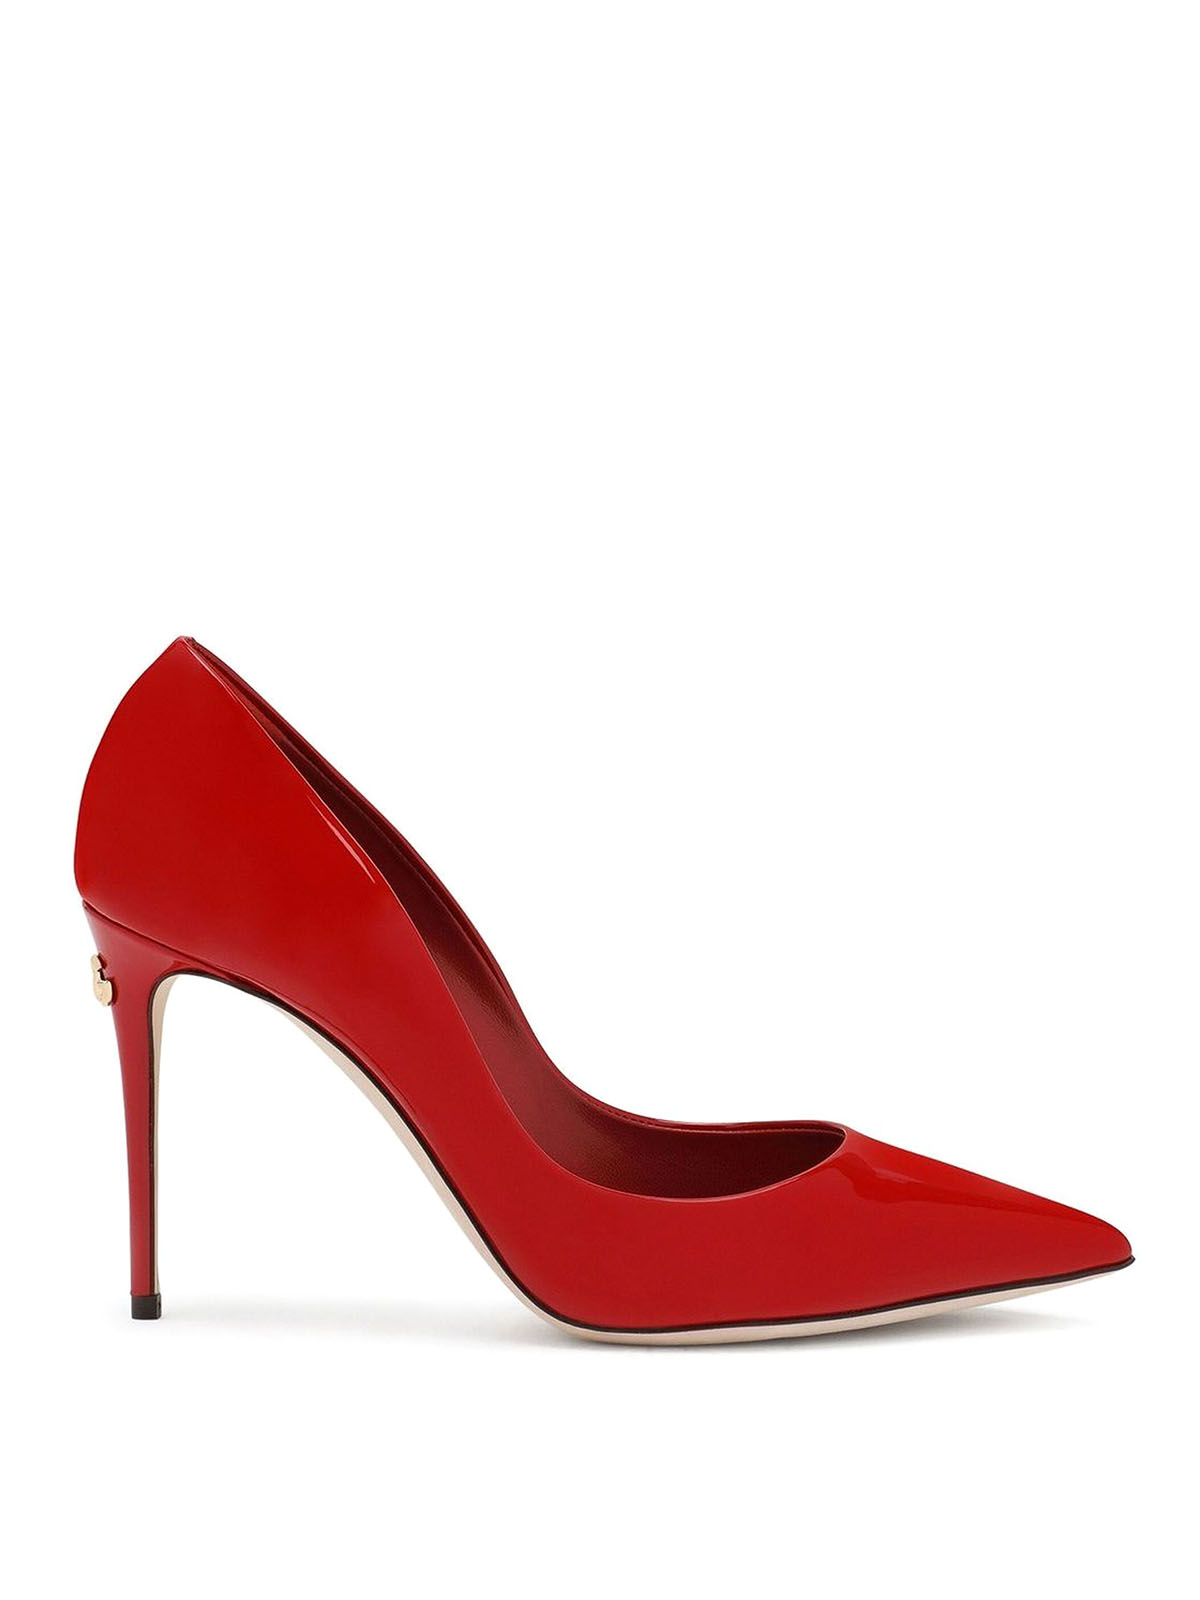 Dolce & Gabbana Patent Leather Pumps In Rojo